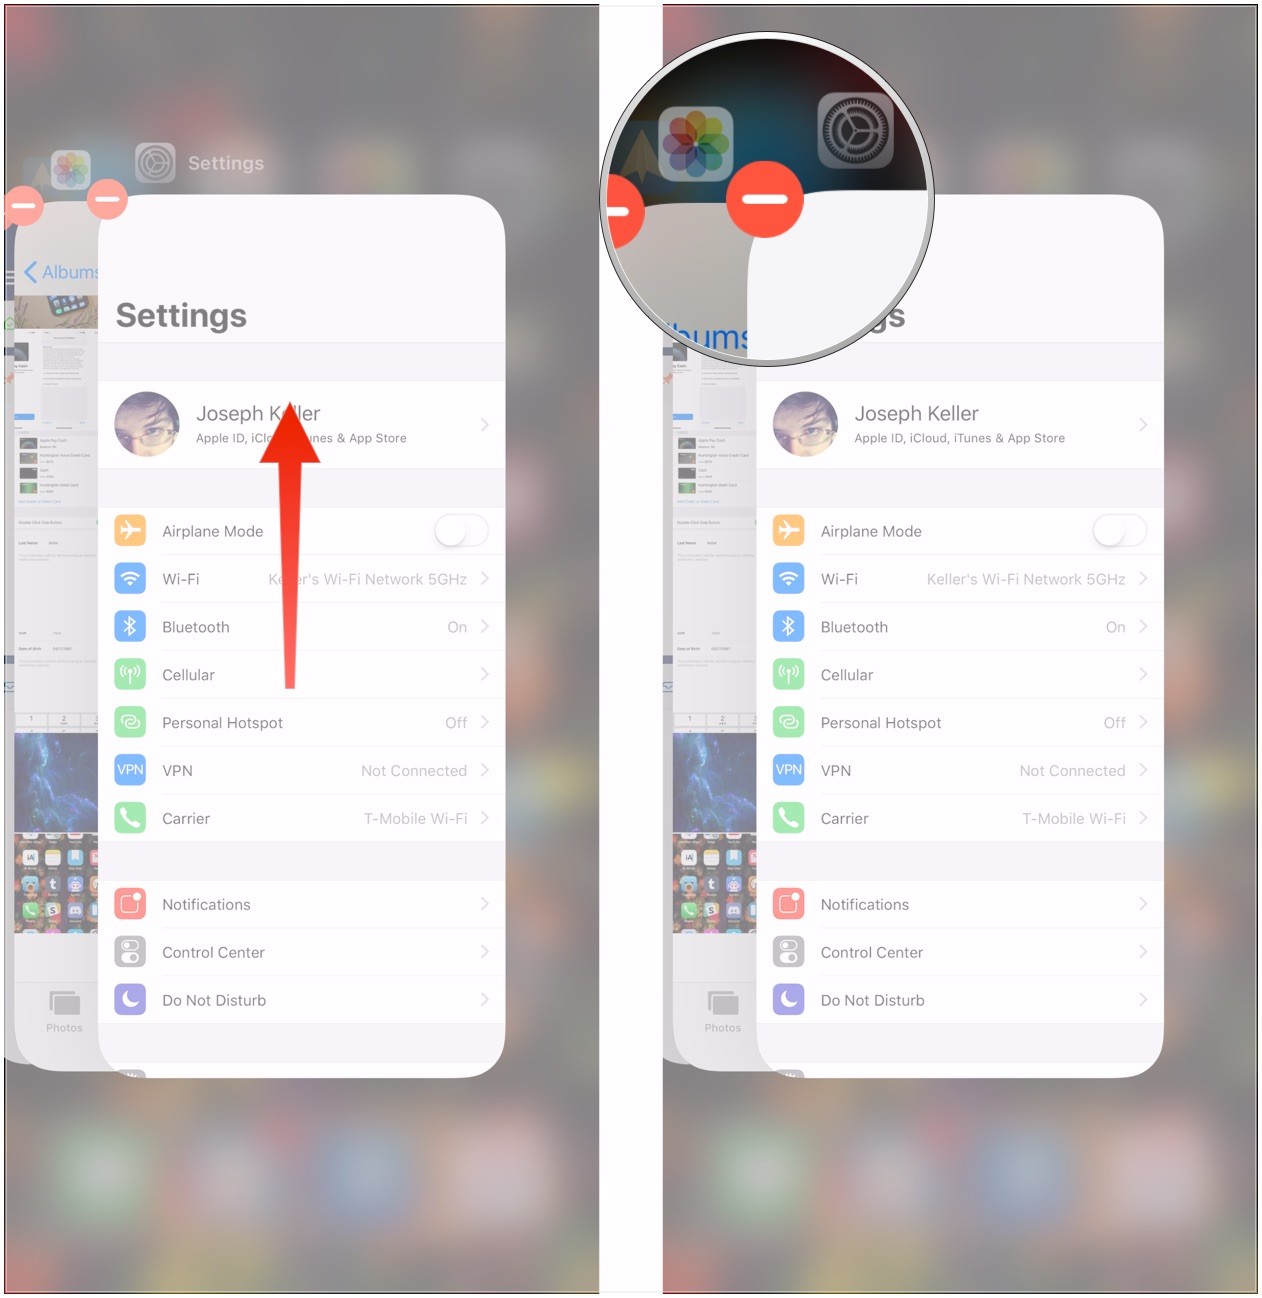 How to Use Multitasking And Fast App Switching on the iPhone X?